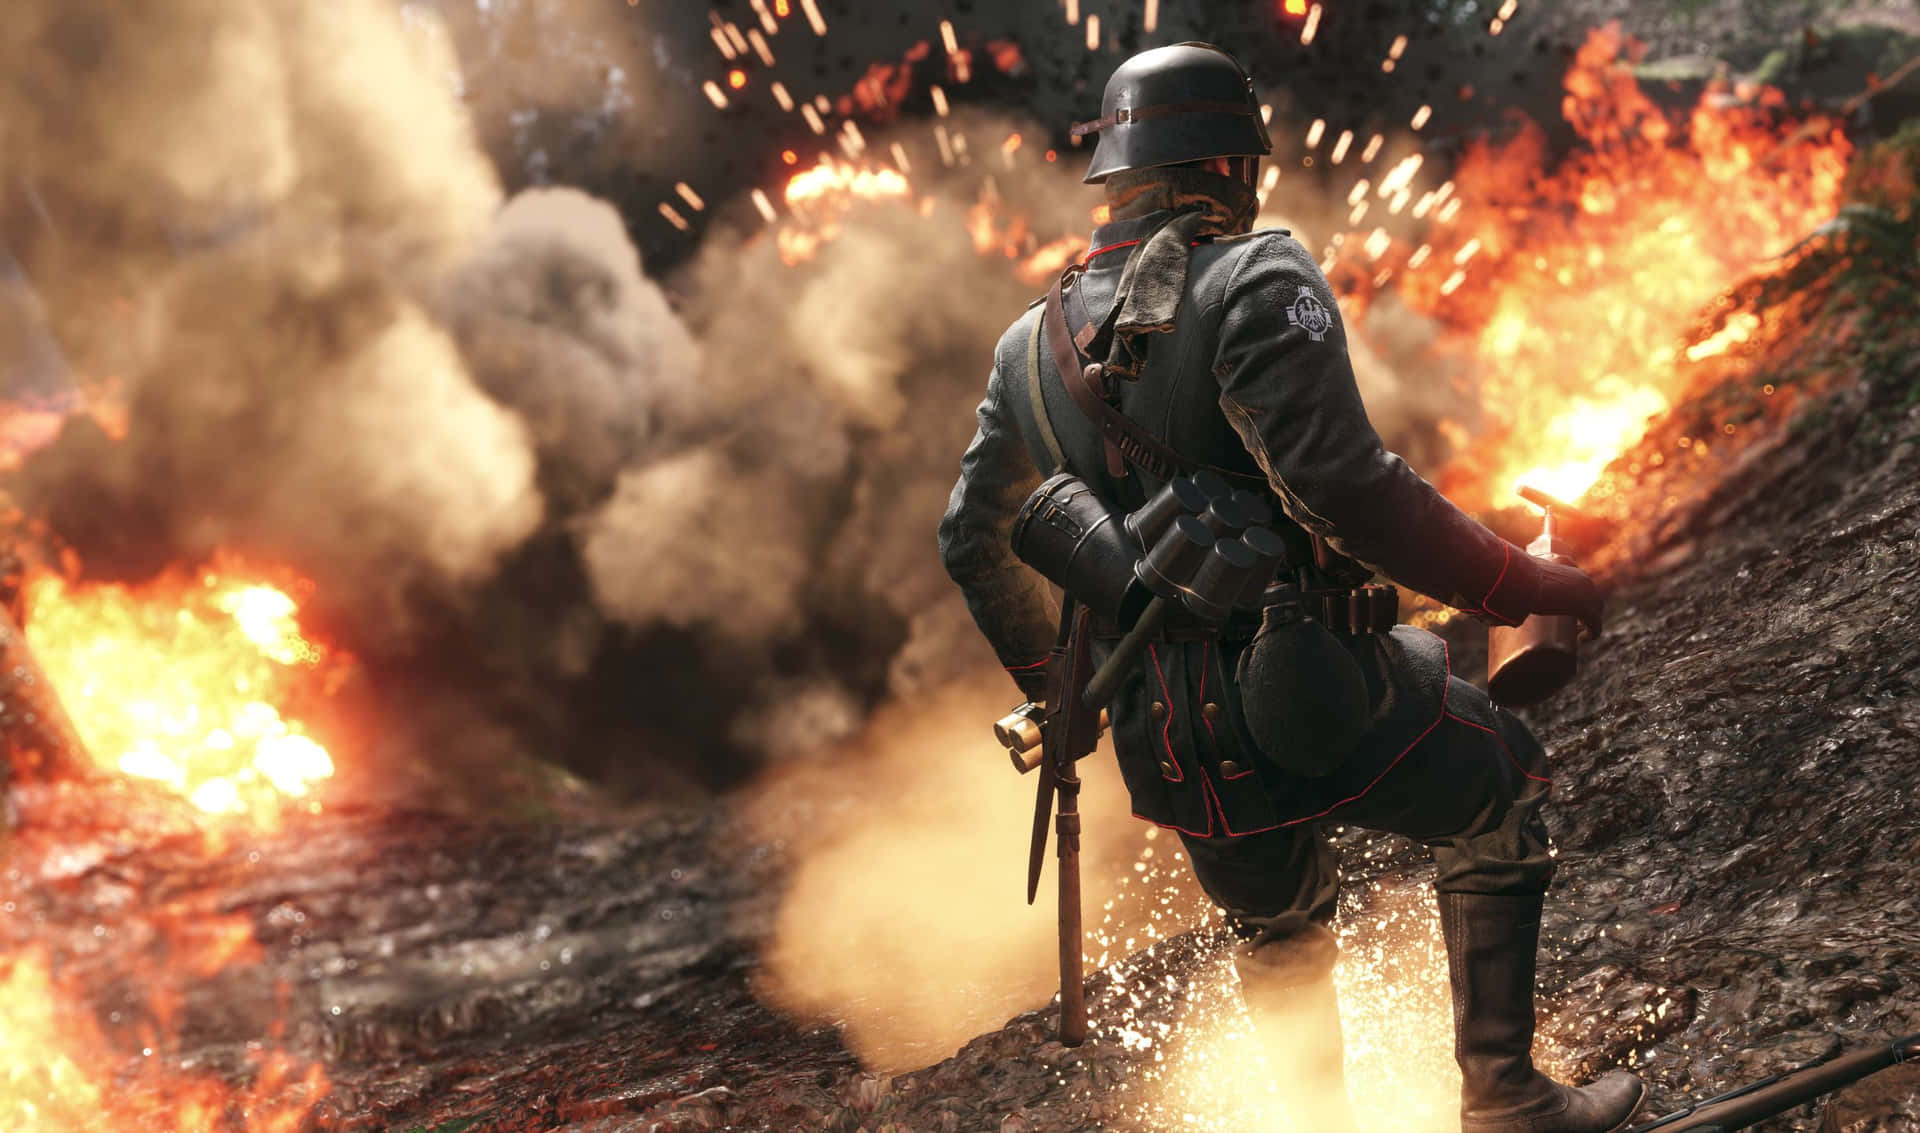 Experience the Epic Battlefield 1 Game in High Resolution